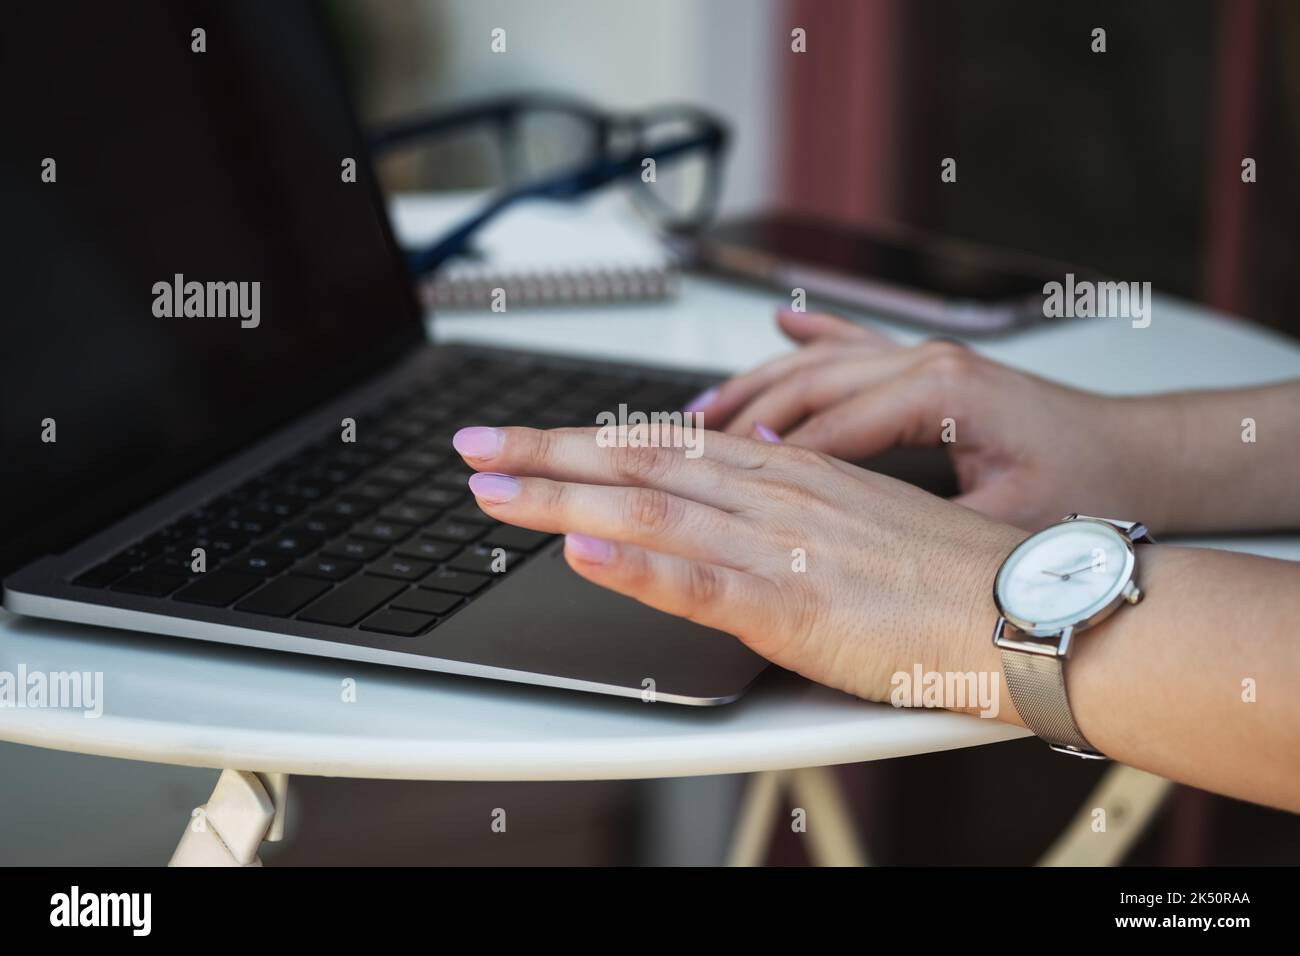 Close up image of woman hands typing on laptop computer keyboard and surfing the internet on office table, online, working, business and technology, internet network communication concept.  Stock Photo